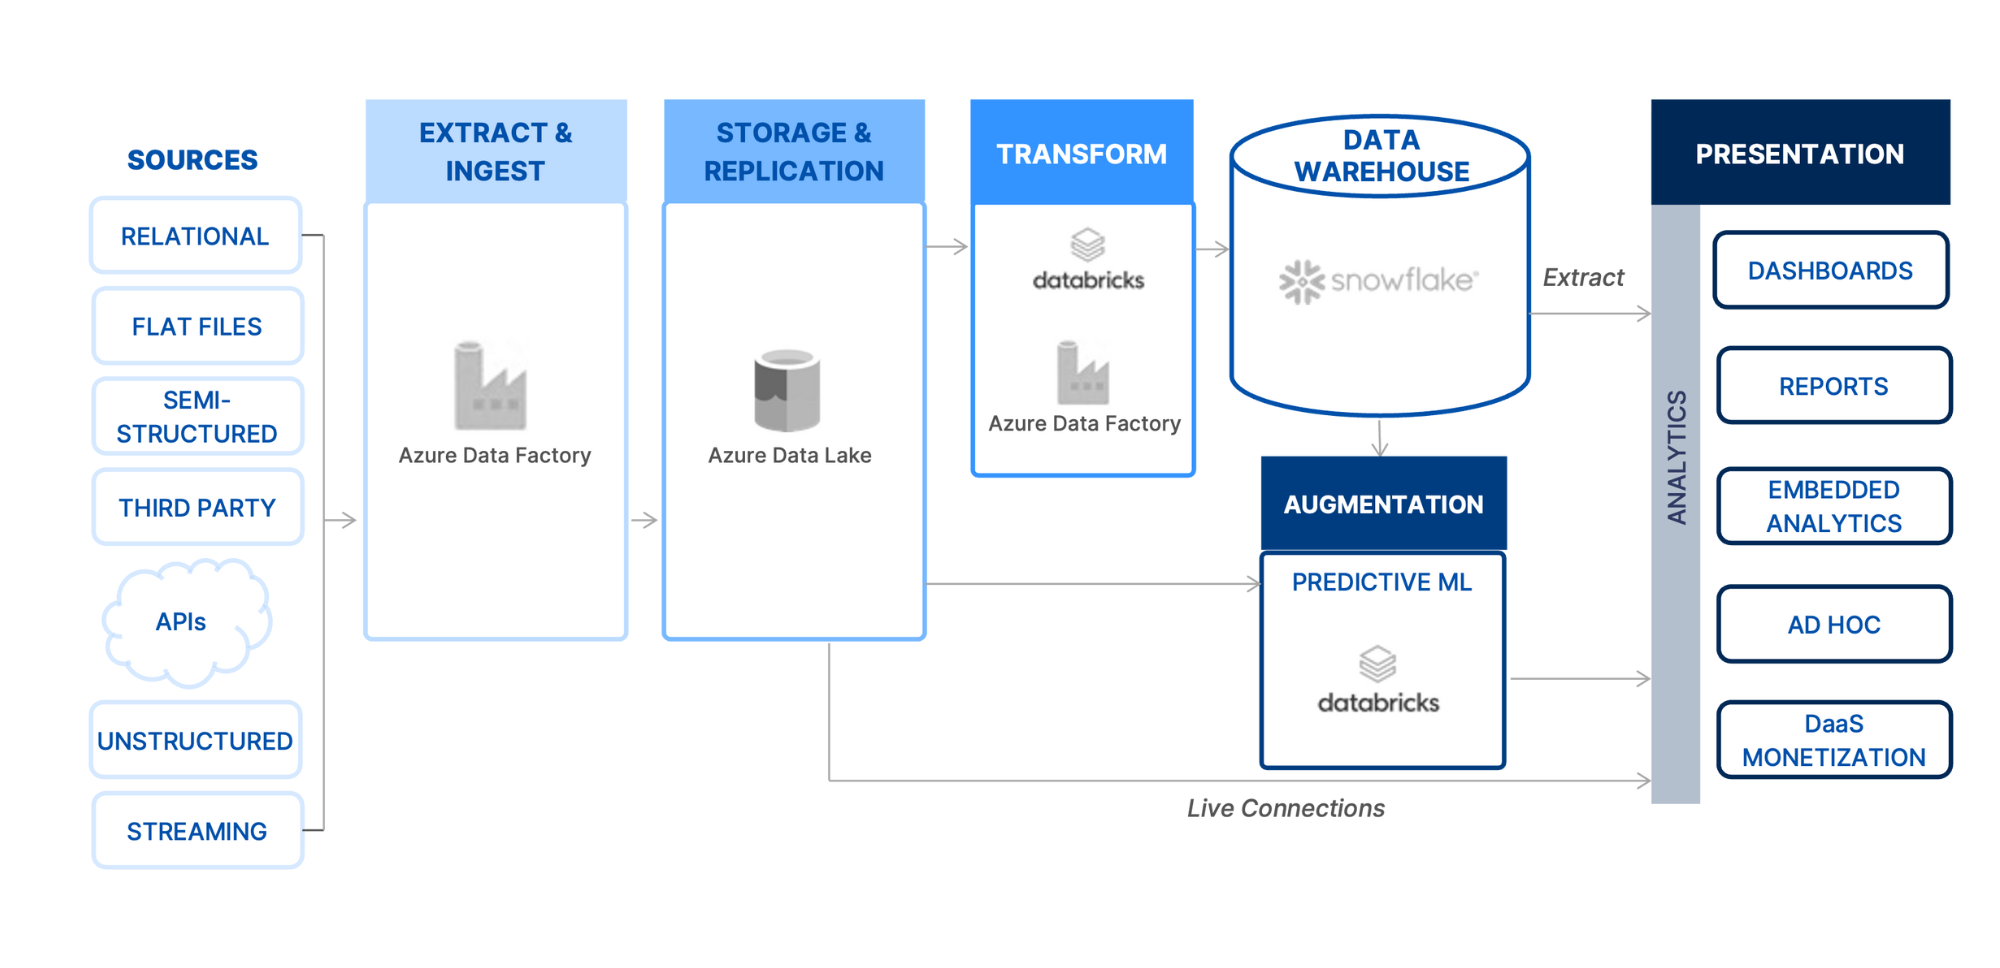 Illustration of a modern data architecture that represents all stages of the data lifecycle—this image represents some of the tool options for each phase of the lifecycle including extract and ingest, data storage and replication, data transformation, data warehouse, and data visualization.